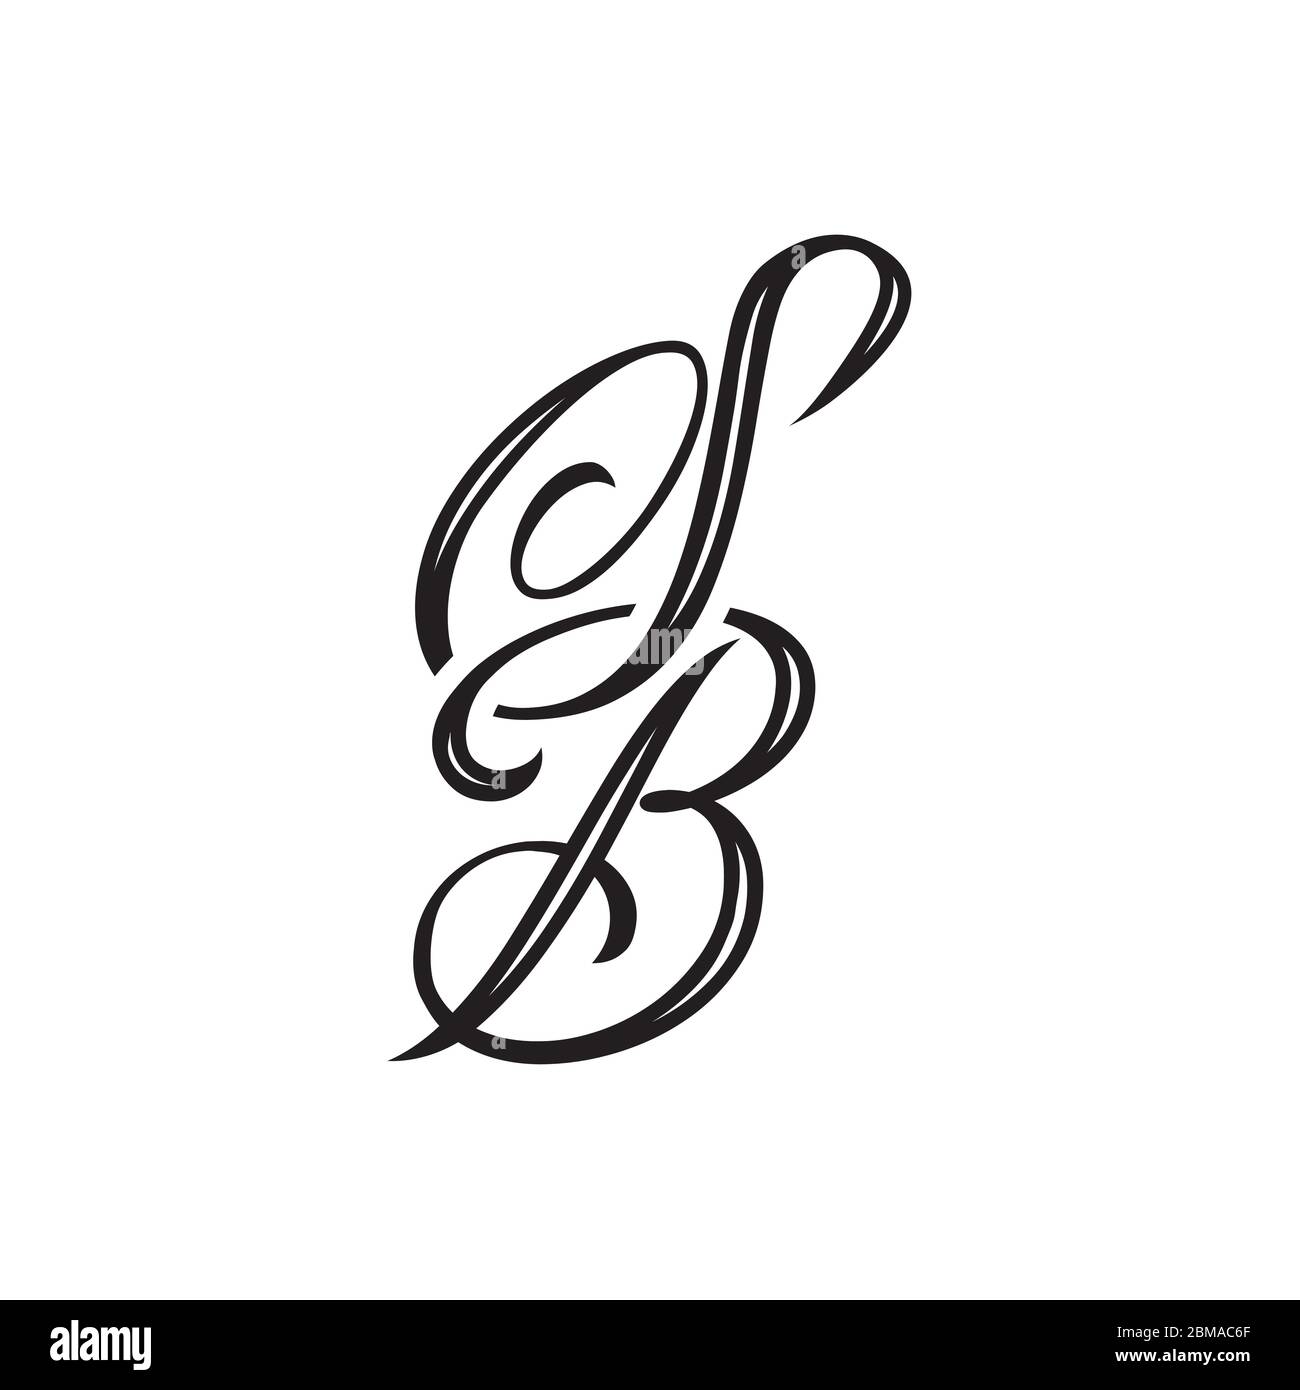 Letter U and Heart Combined - Tattoo Design Ideas for Initials - YouTube